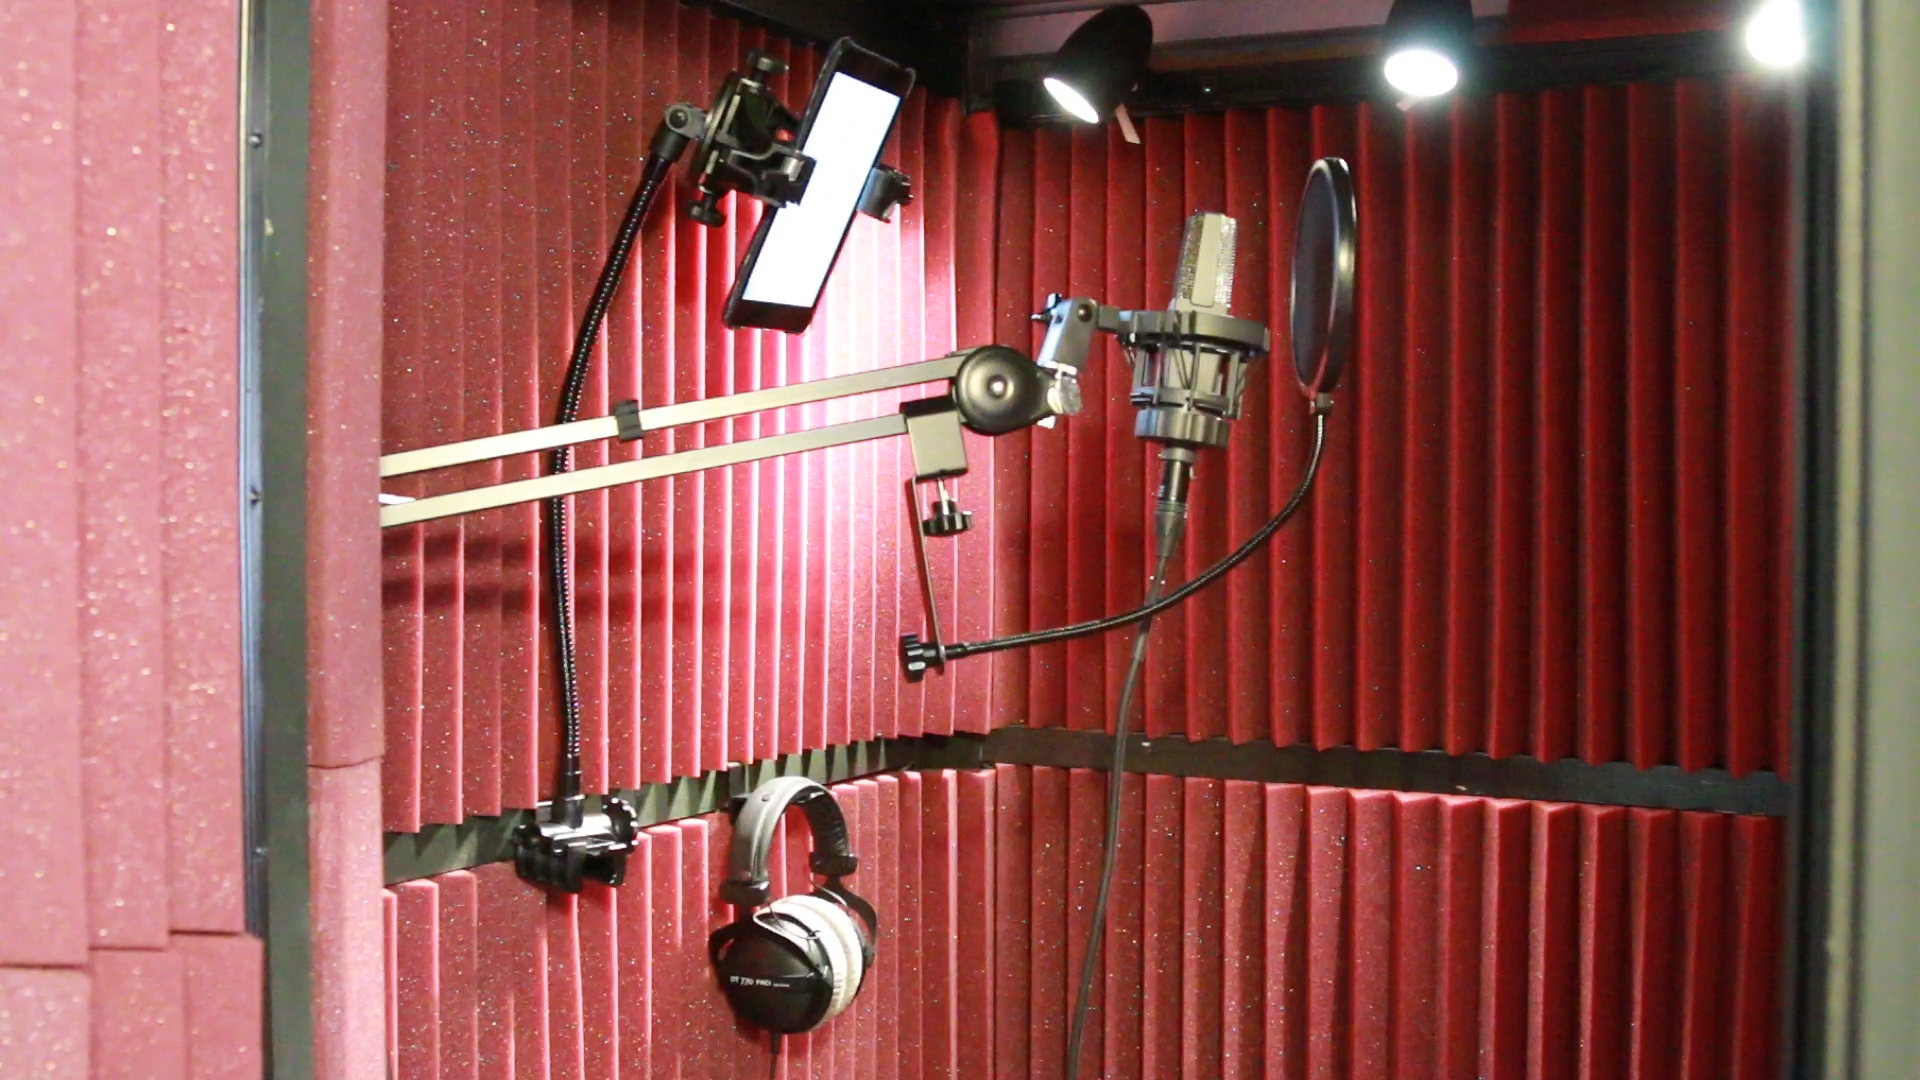 DIY Vocal Booth (Recording booth) - KVR Audio Forum